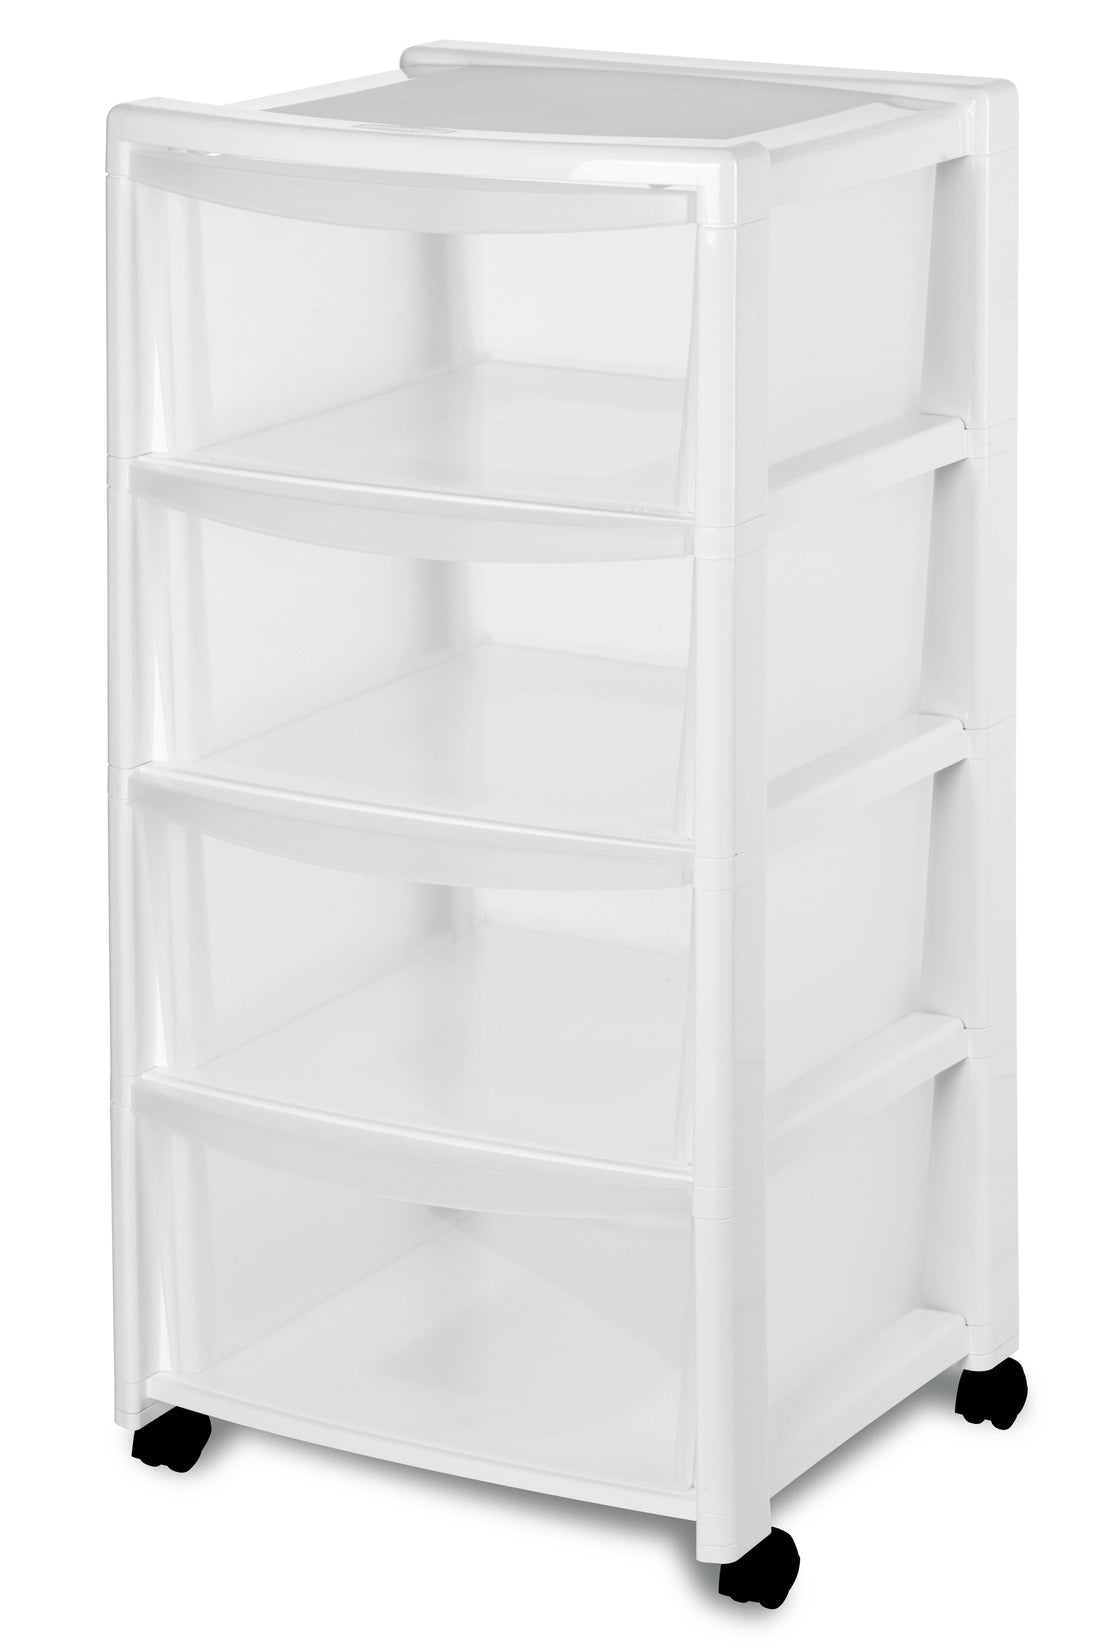 WHITE CABINET 4 TRANSPARENT DRAWERS H80xW40xD40CM PLASTIC CABINET WITH WHEELS - best price from Maltashopper.com BR410001361